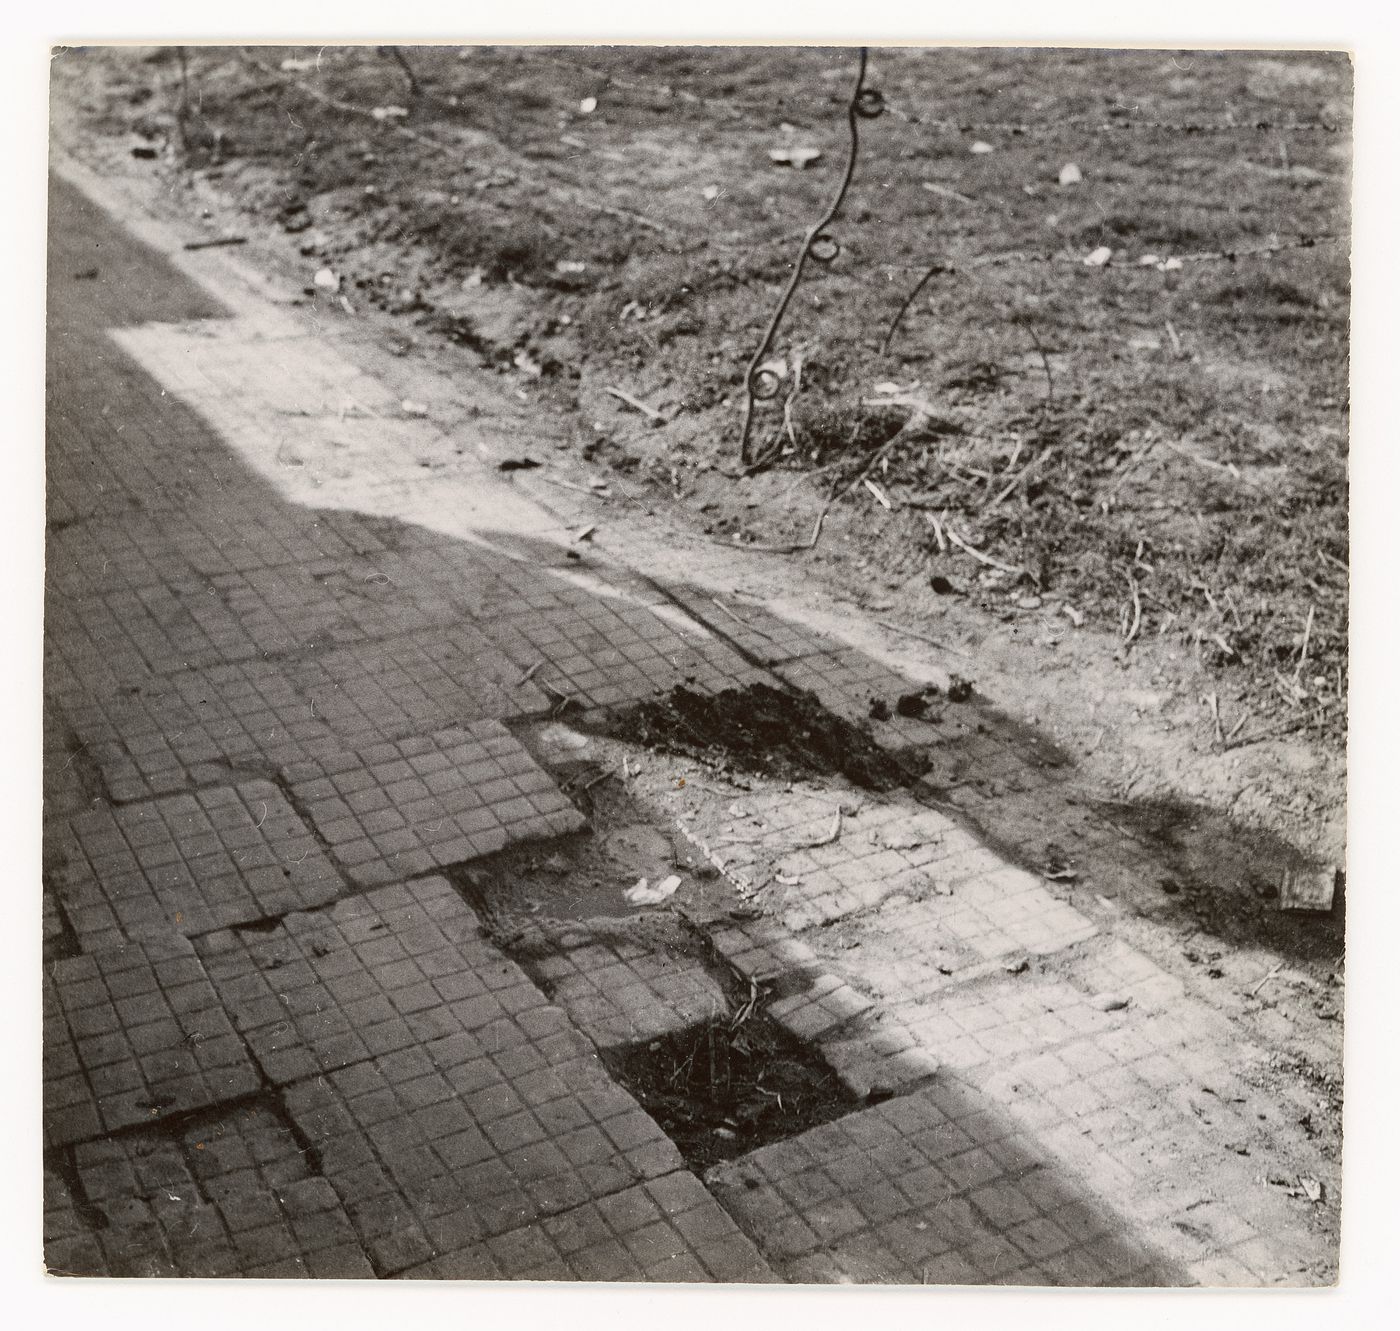 View of broken gridded pavement tiles during the construction of Chandigarh, India